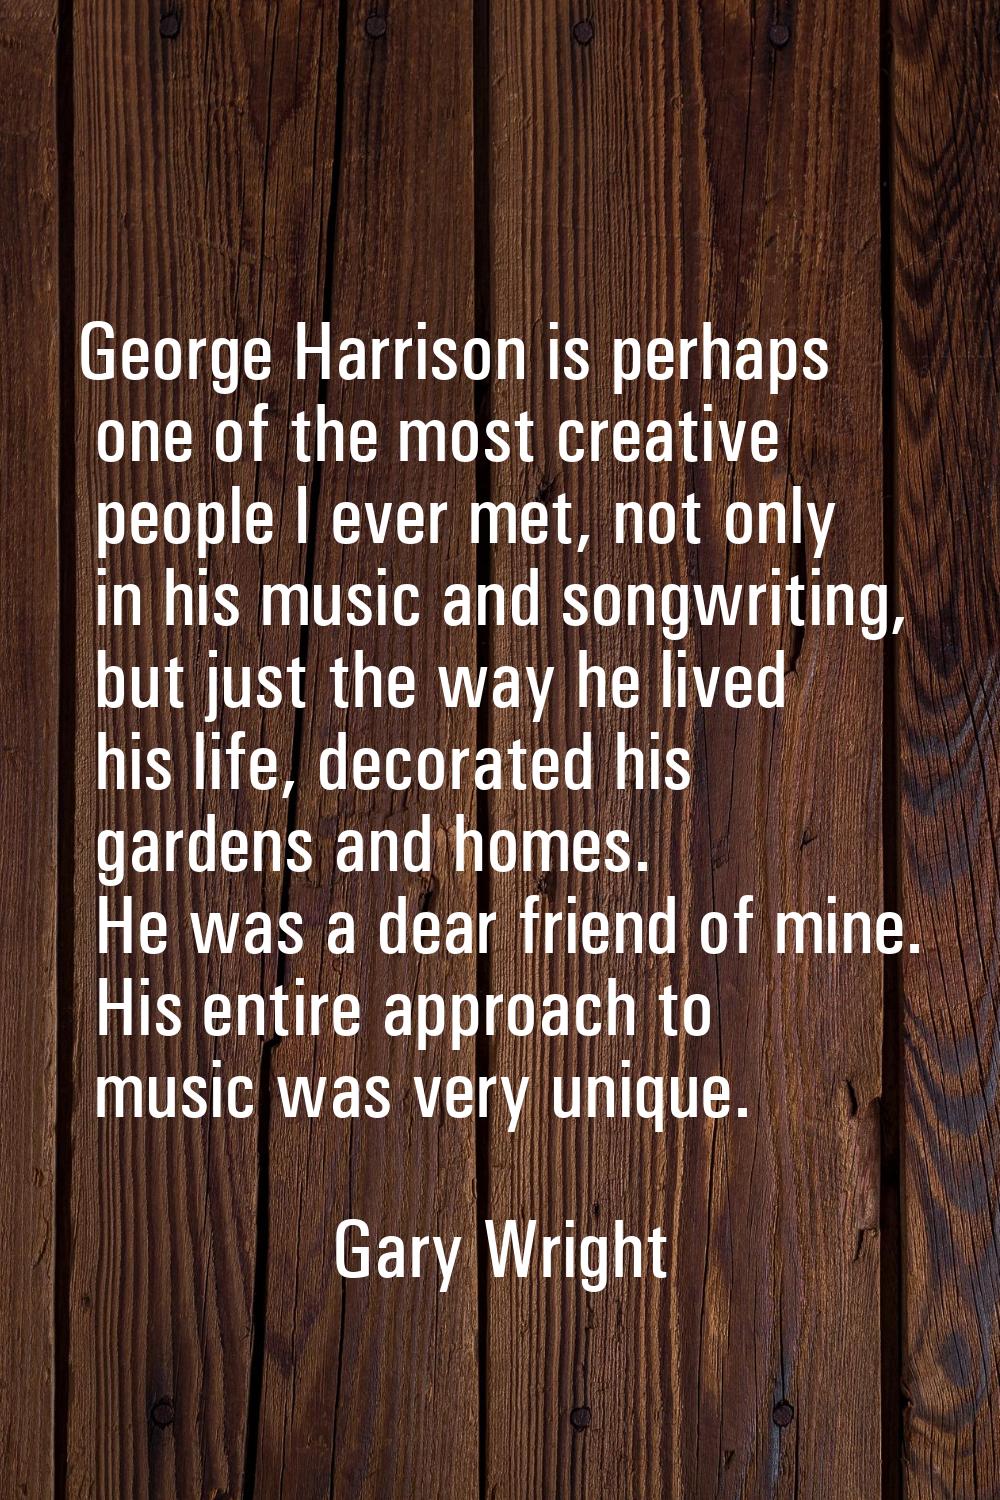 George Harrison is perhaps one of the most creative people I ever met, not only in his music and so